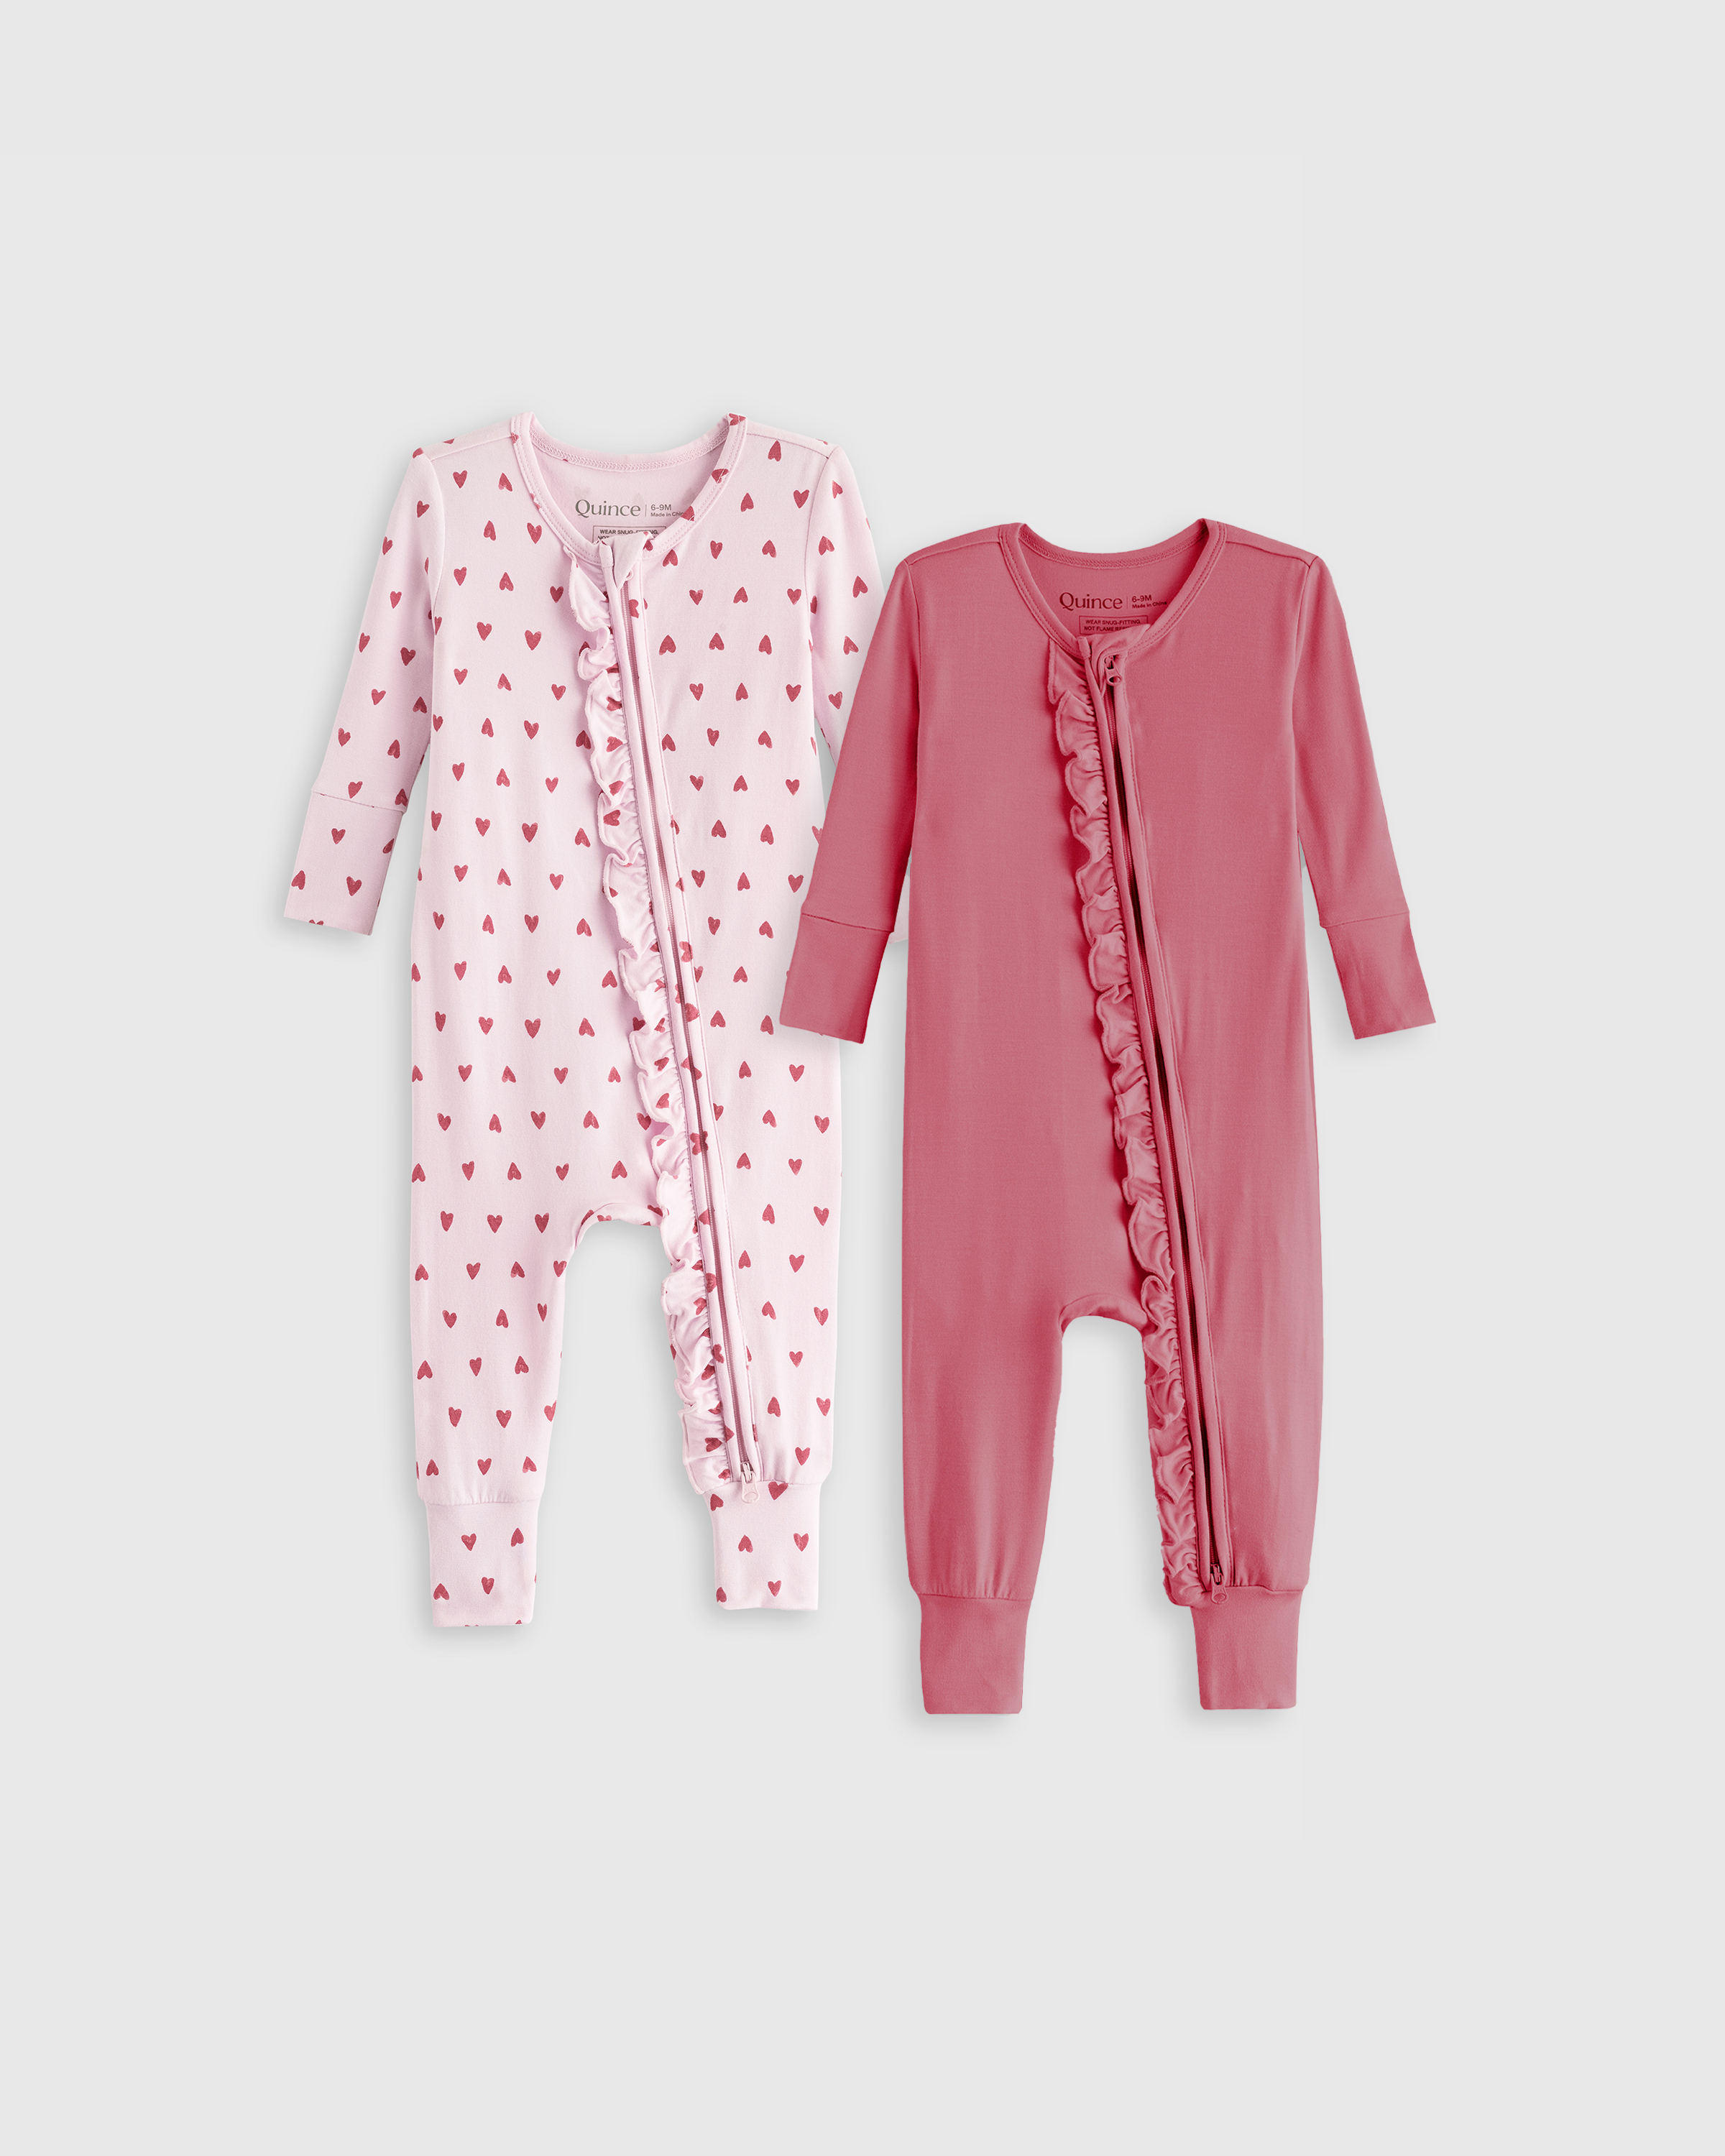 Quince Bamboo One Piece Ruffle Pajamas 2-pack In Pink